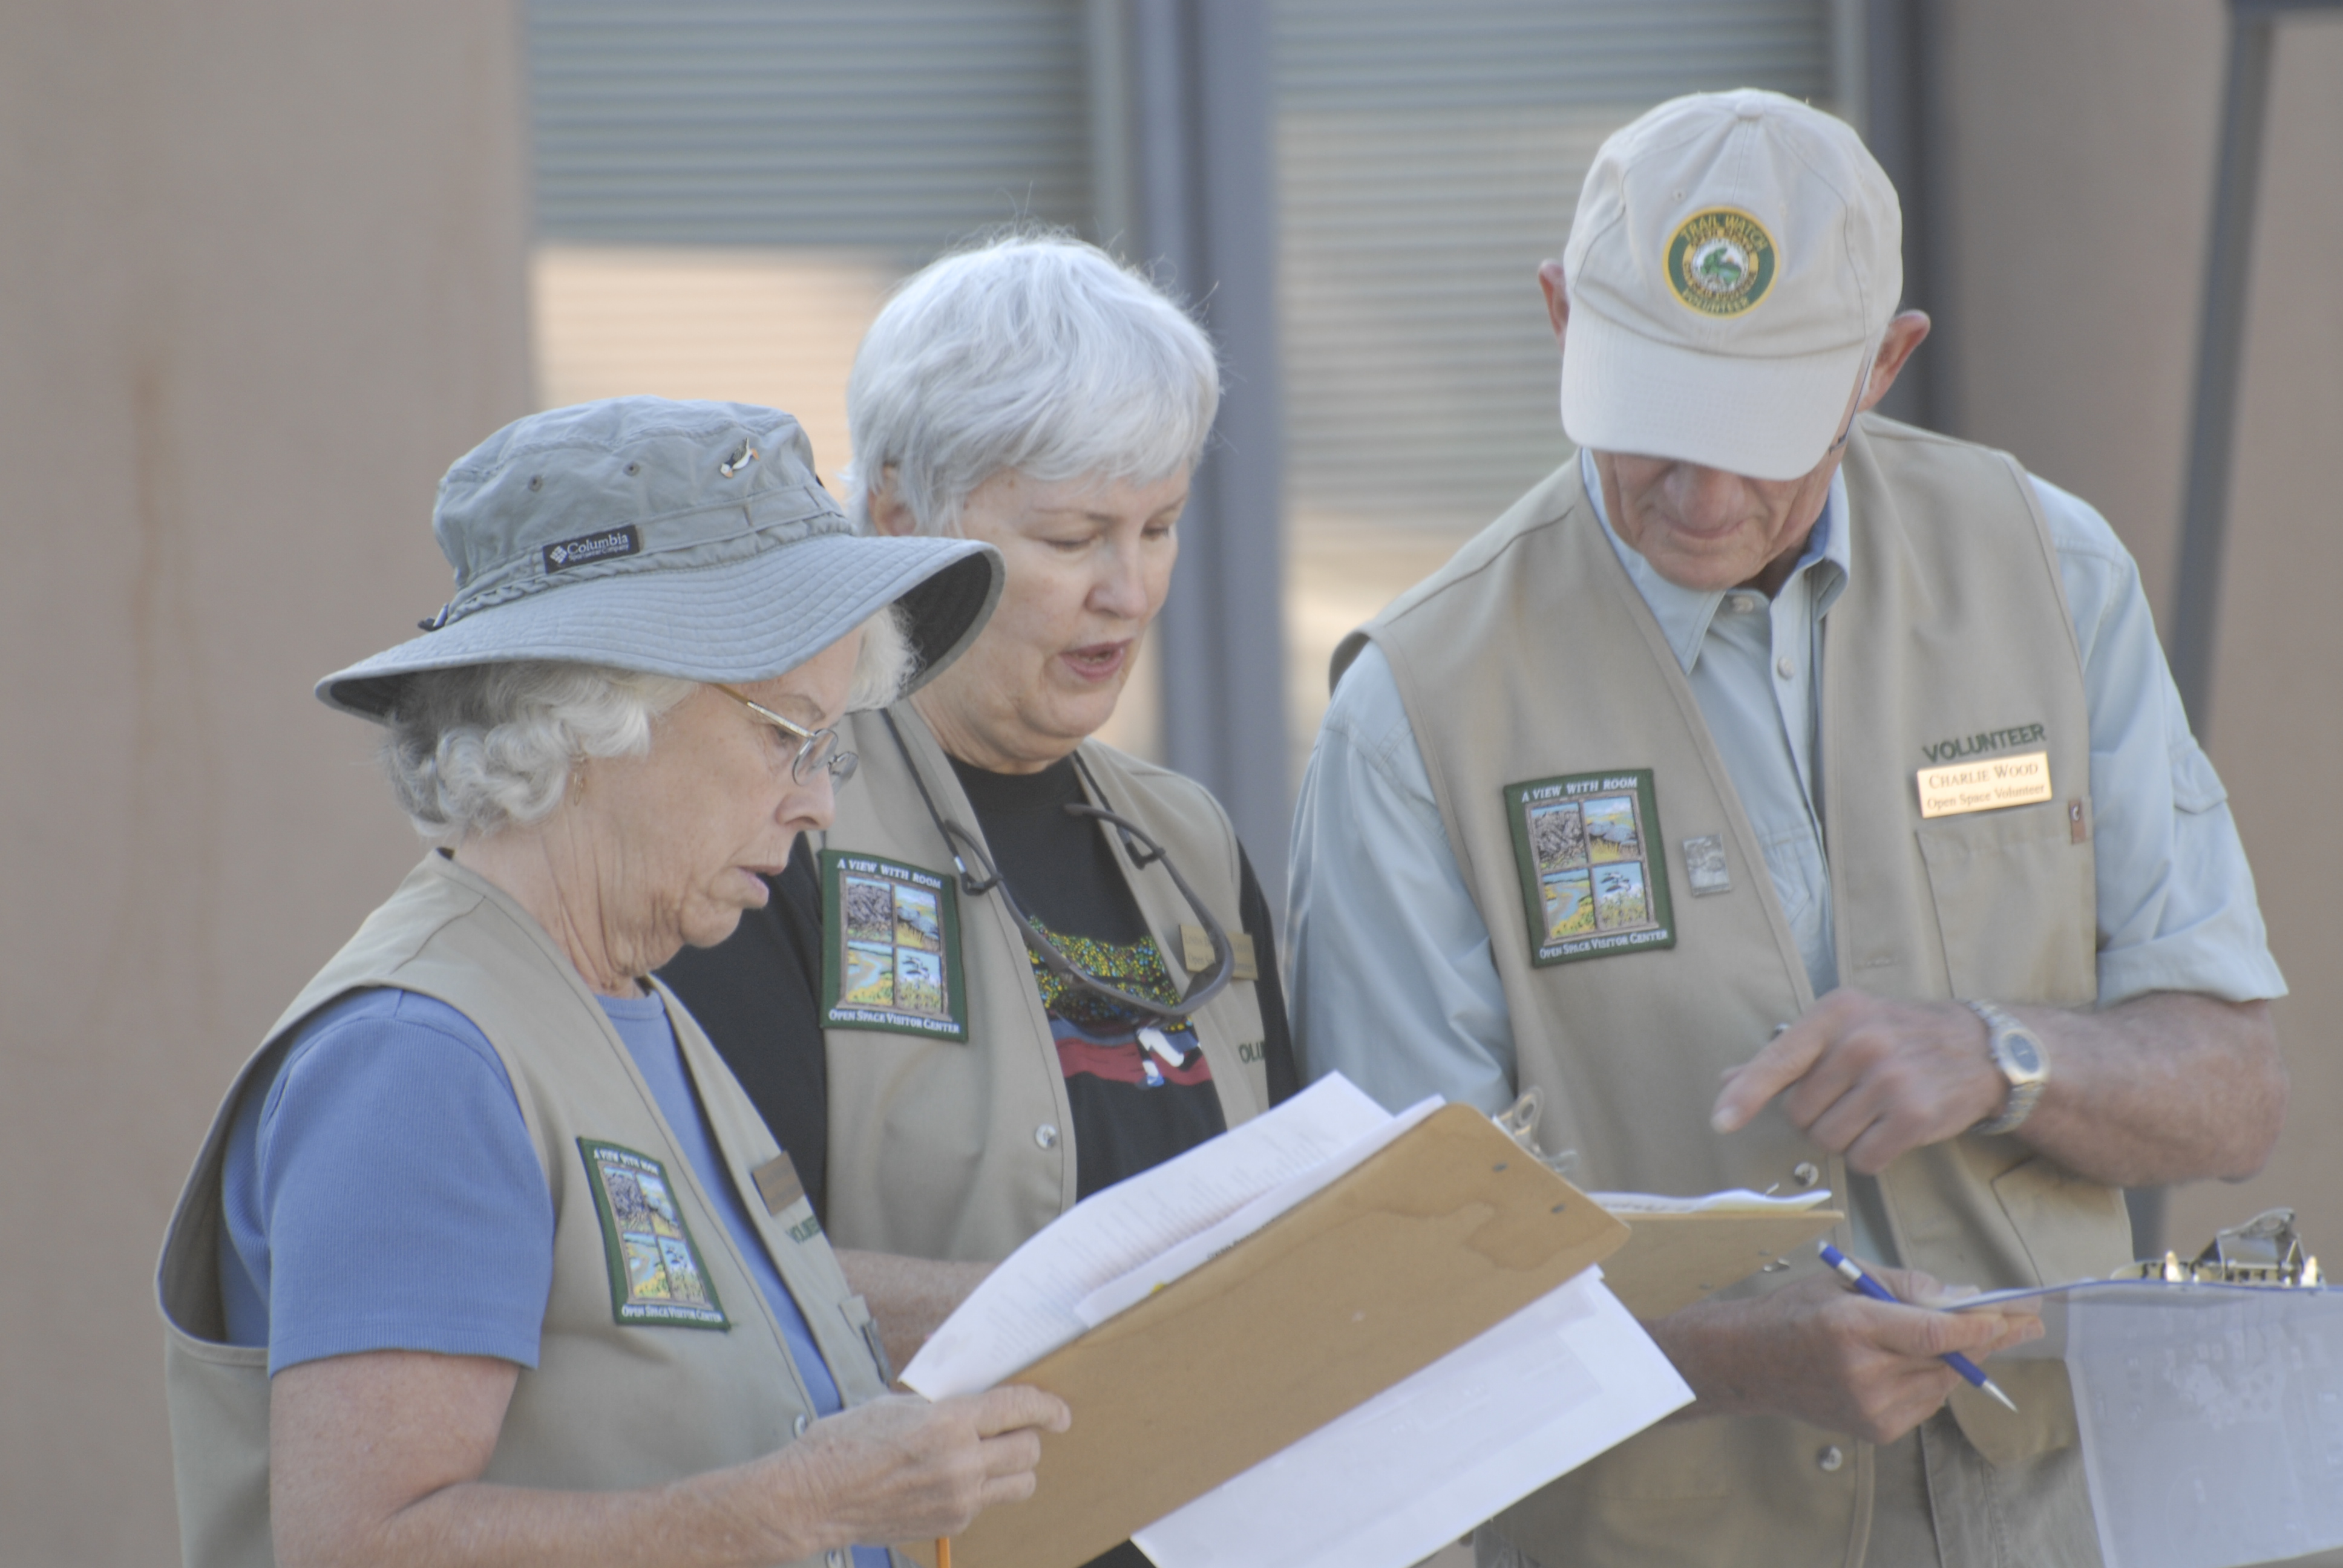 Three Open Space volunteers outside of a building reviewing documents on clipboards.